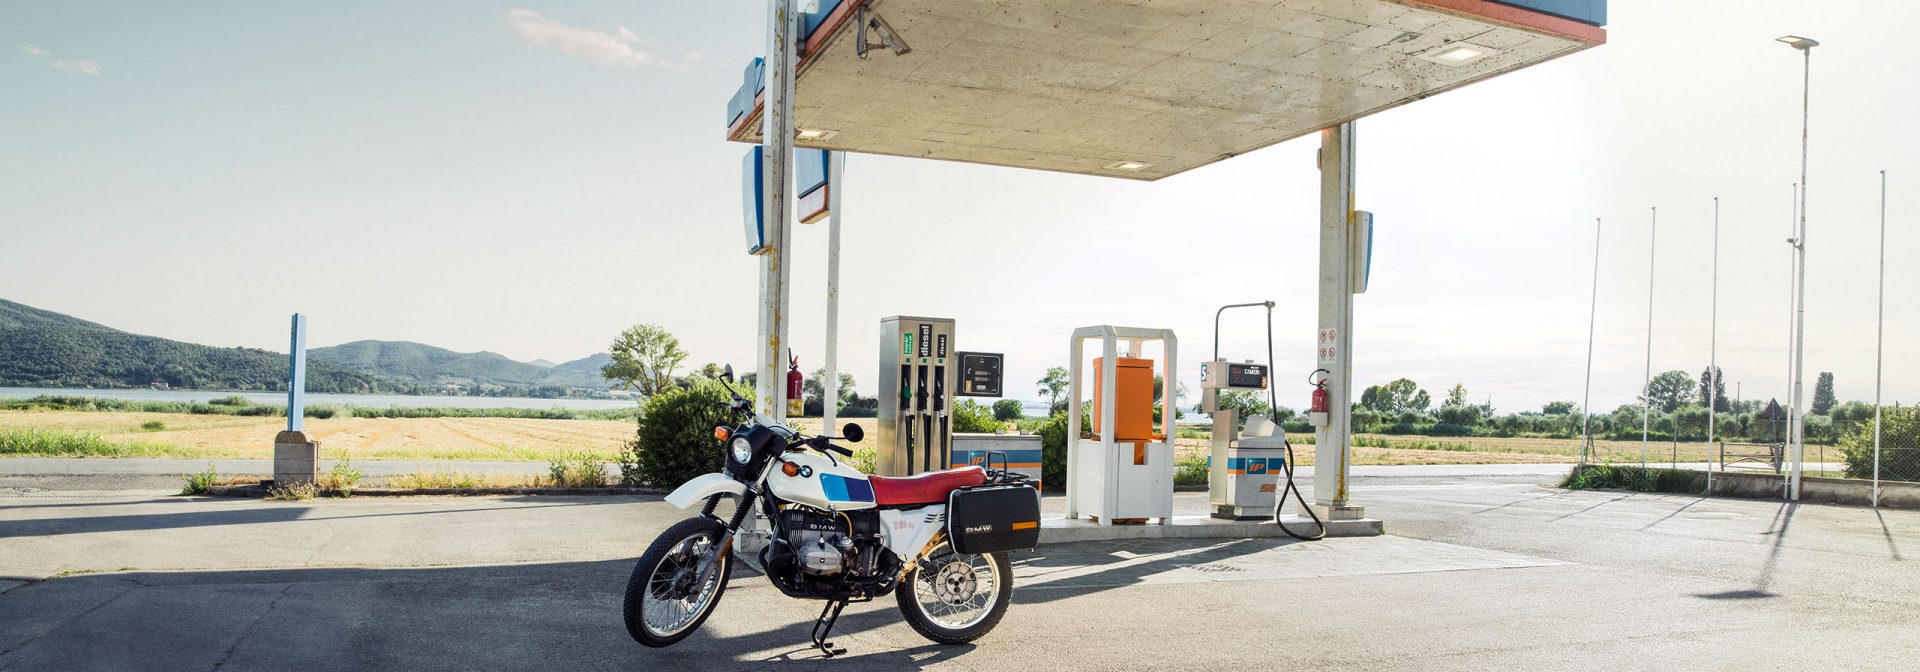 A motorbike is parked in front of a gas station